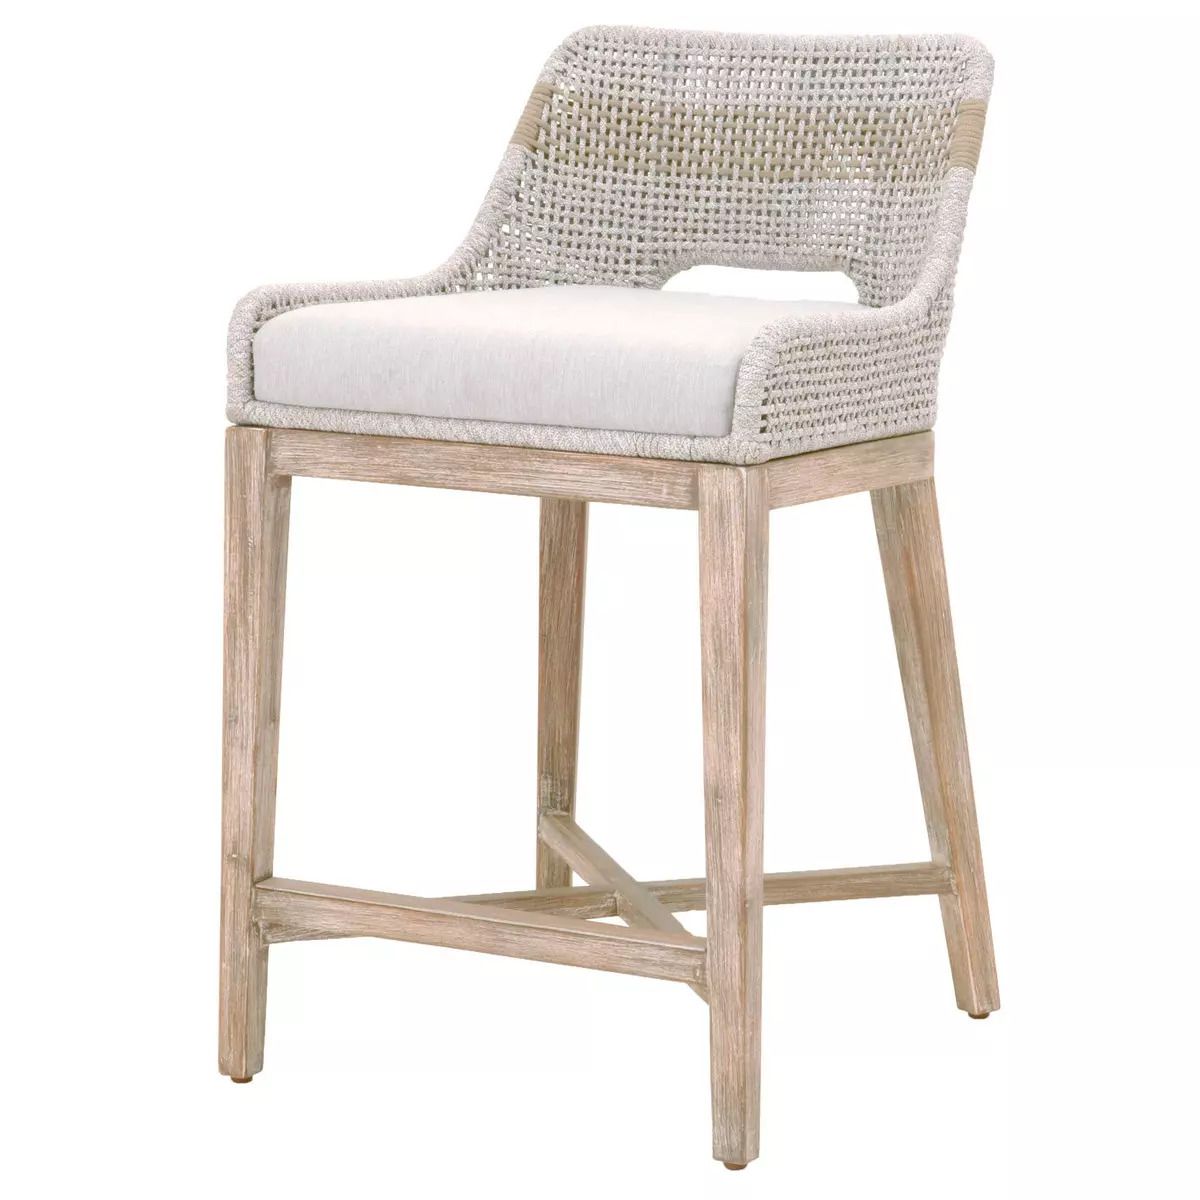 Tapestry Counter Stool | Scout & Nimble